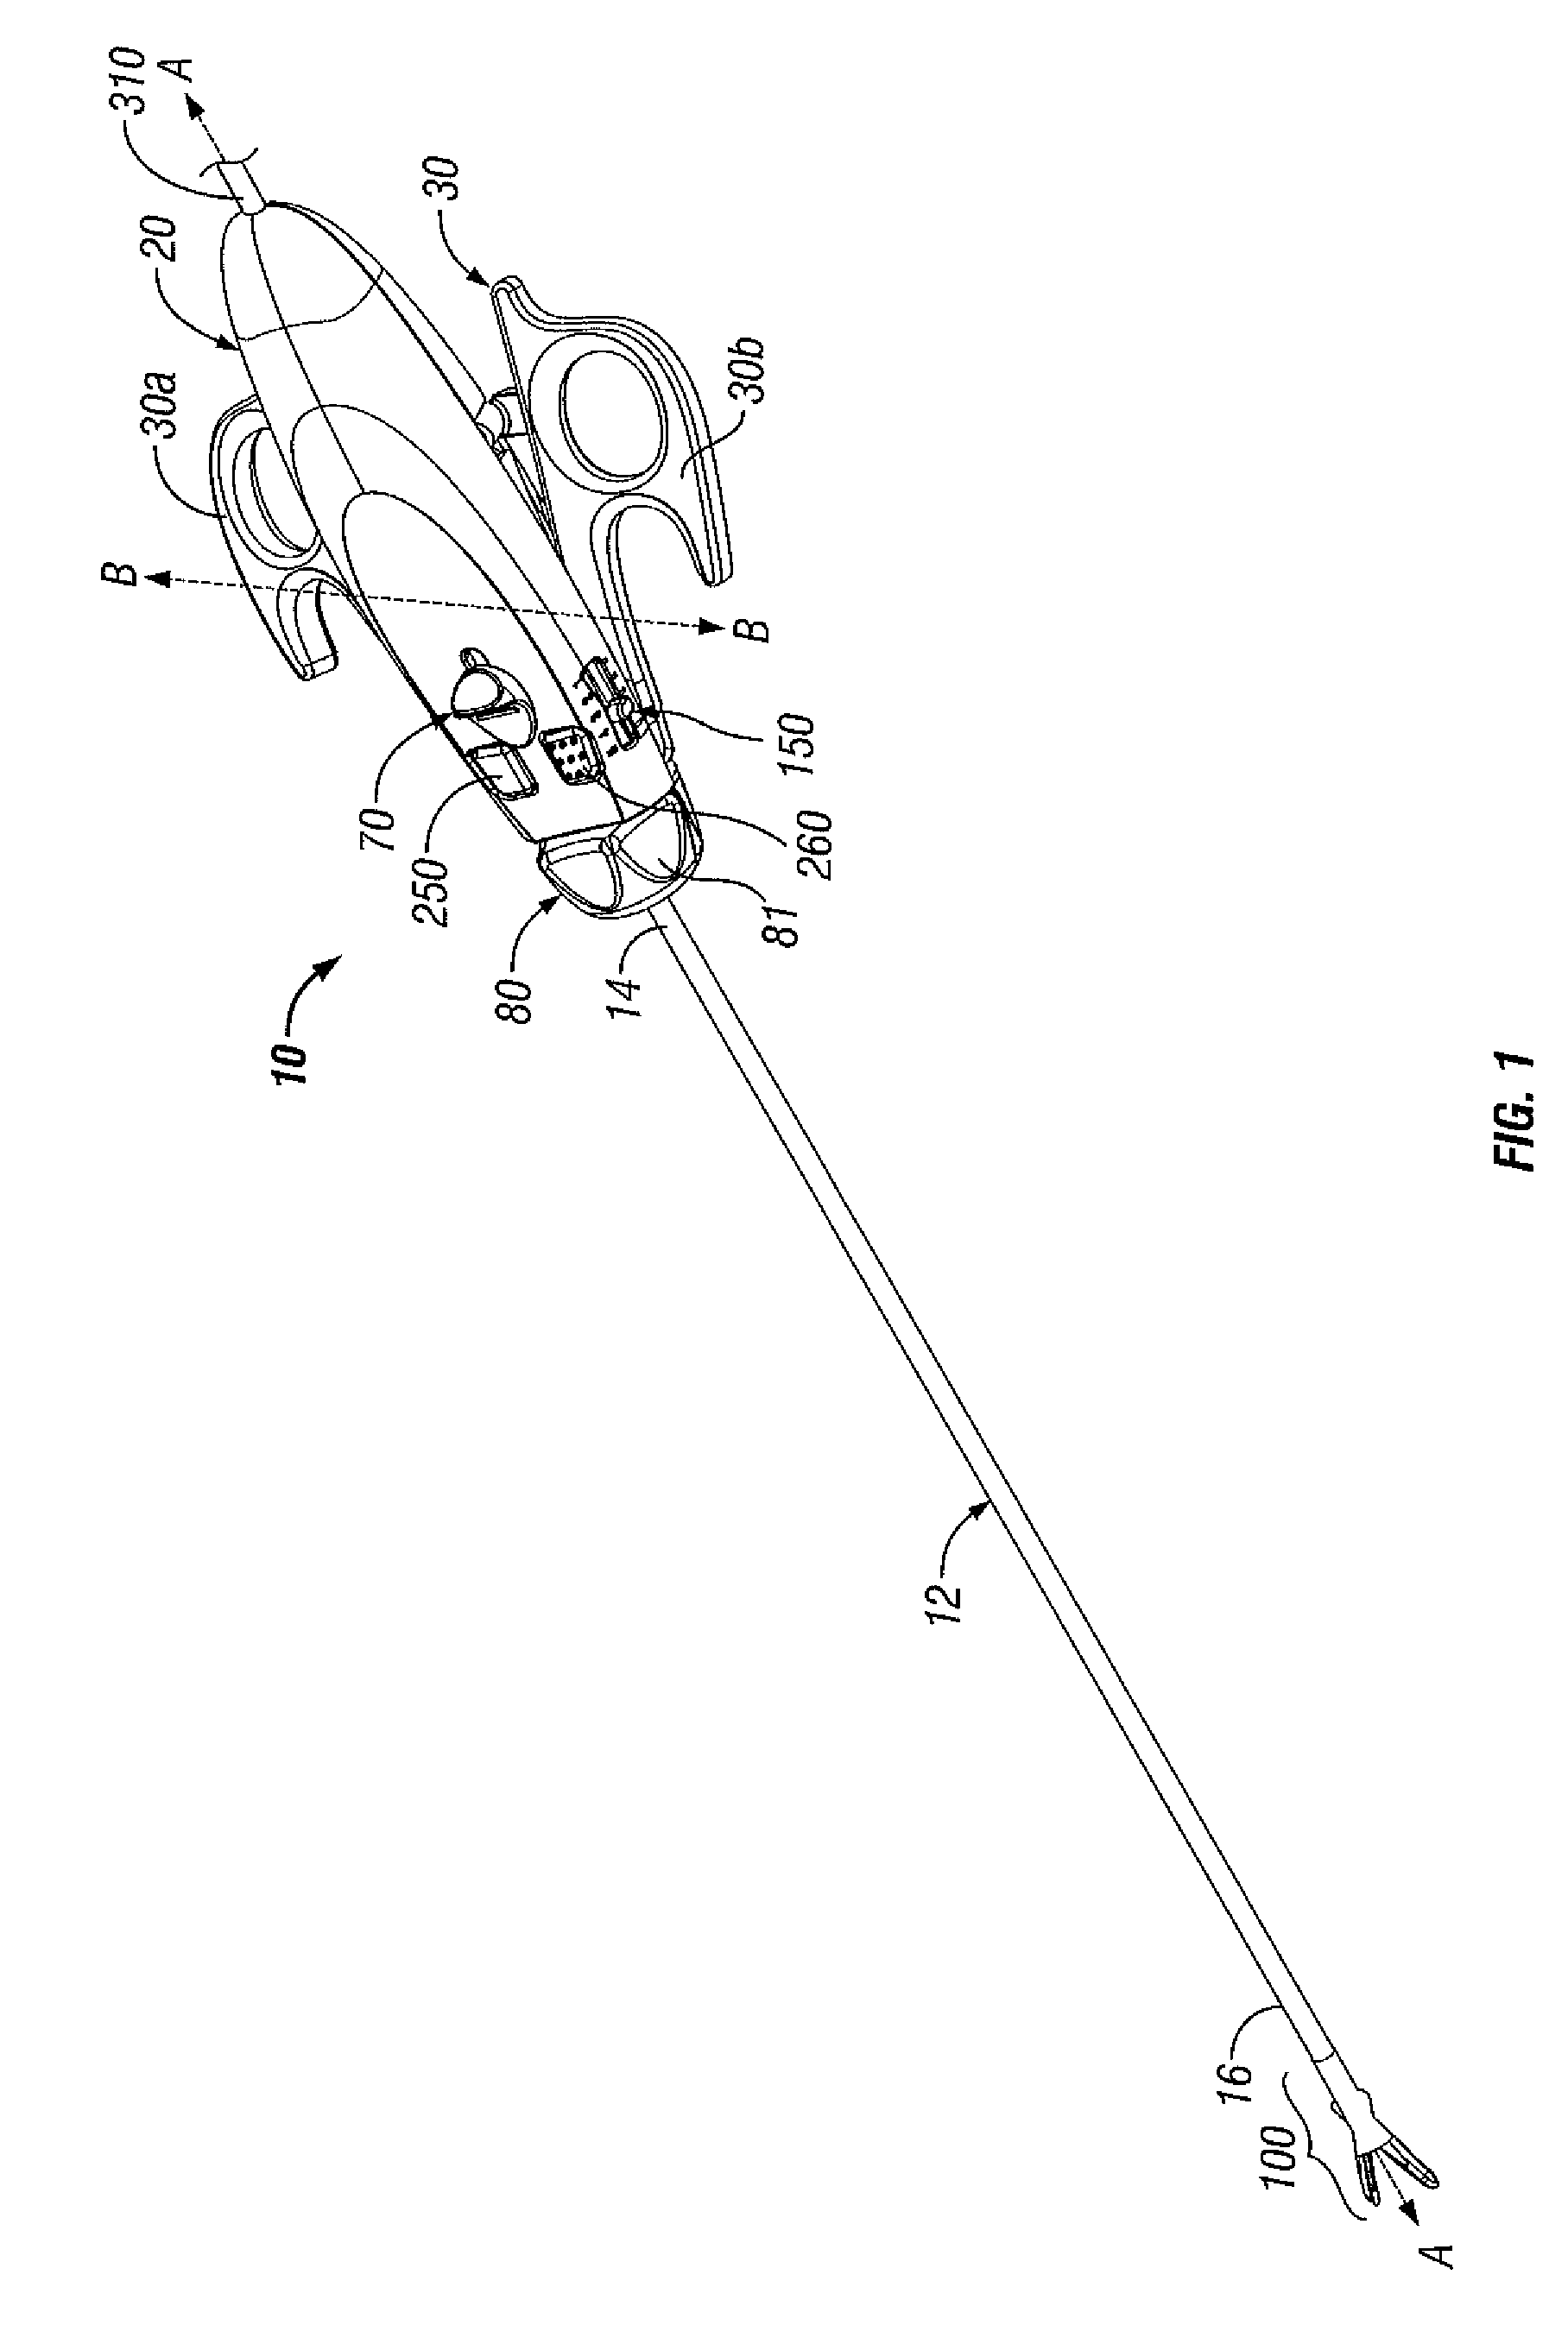 Insulating Mesh-like Boot for Electrosurgical Forceps